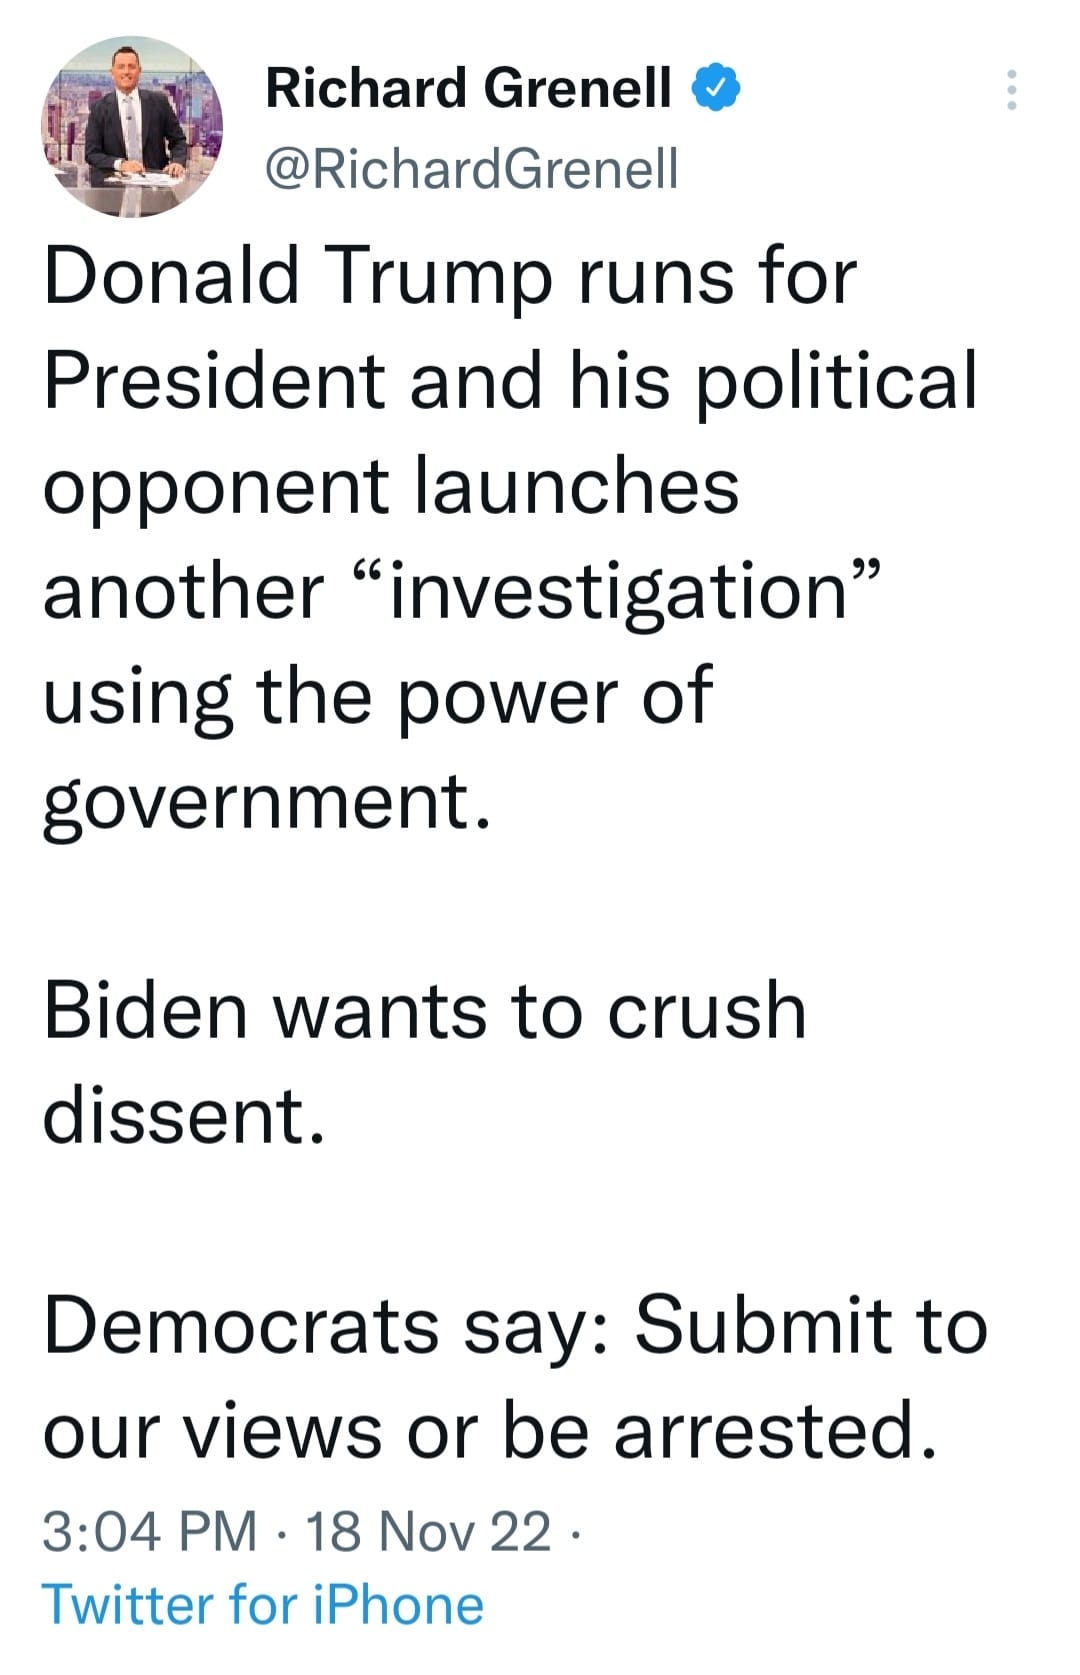 May be an image of 1 person and text that says 'Richard Grenell @RichardGrenell Donald Trump runs for President and his political opponent launches another "investigation" using the power of government. Biden wants to crush dissent. Democrats say: Submit to our views or be arrested. 3:04 PM. PM 18 18 Nov 22. 22 Twitter for iPhone'